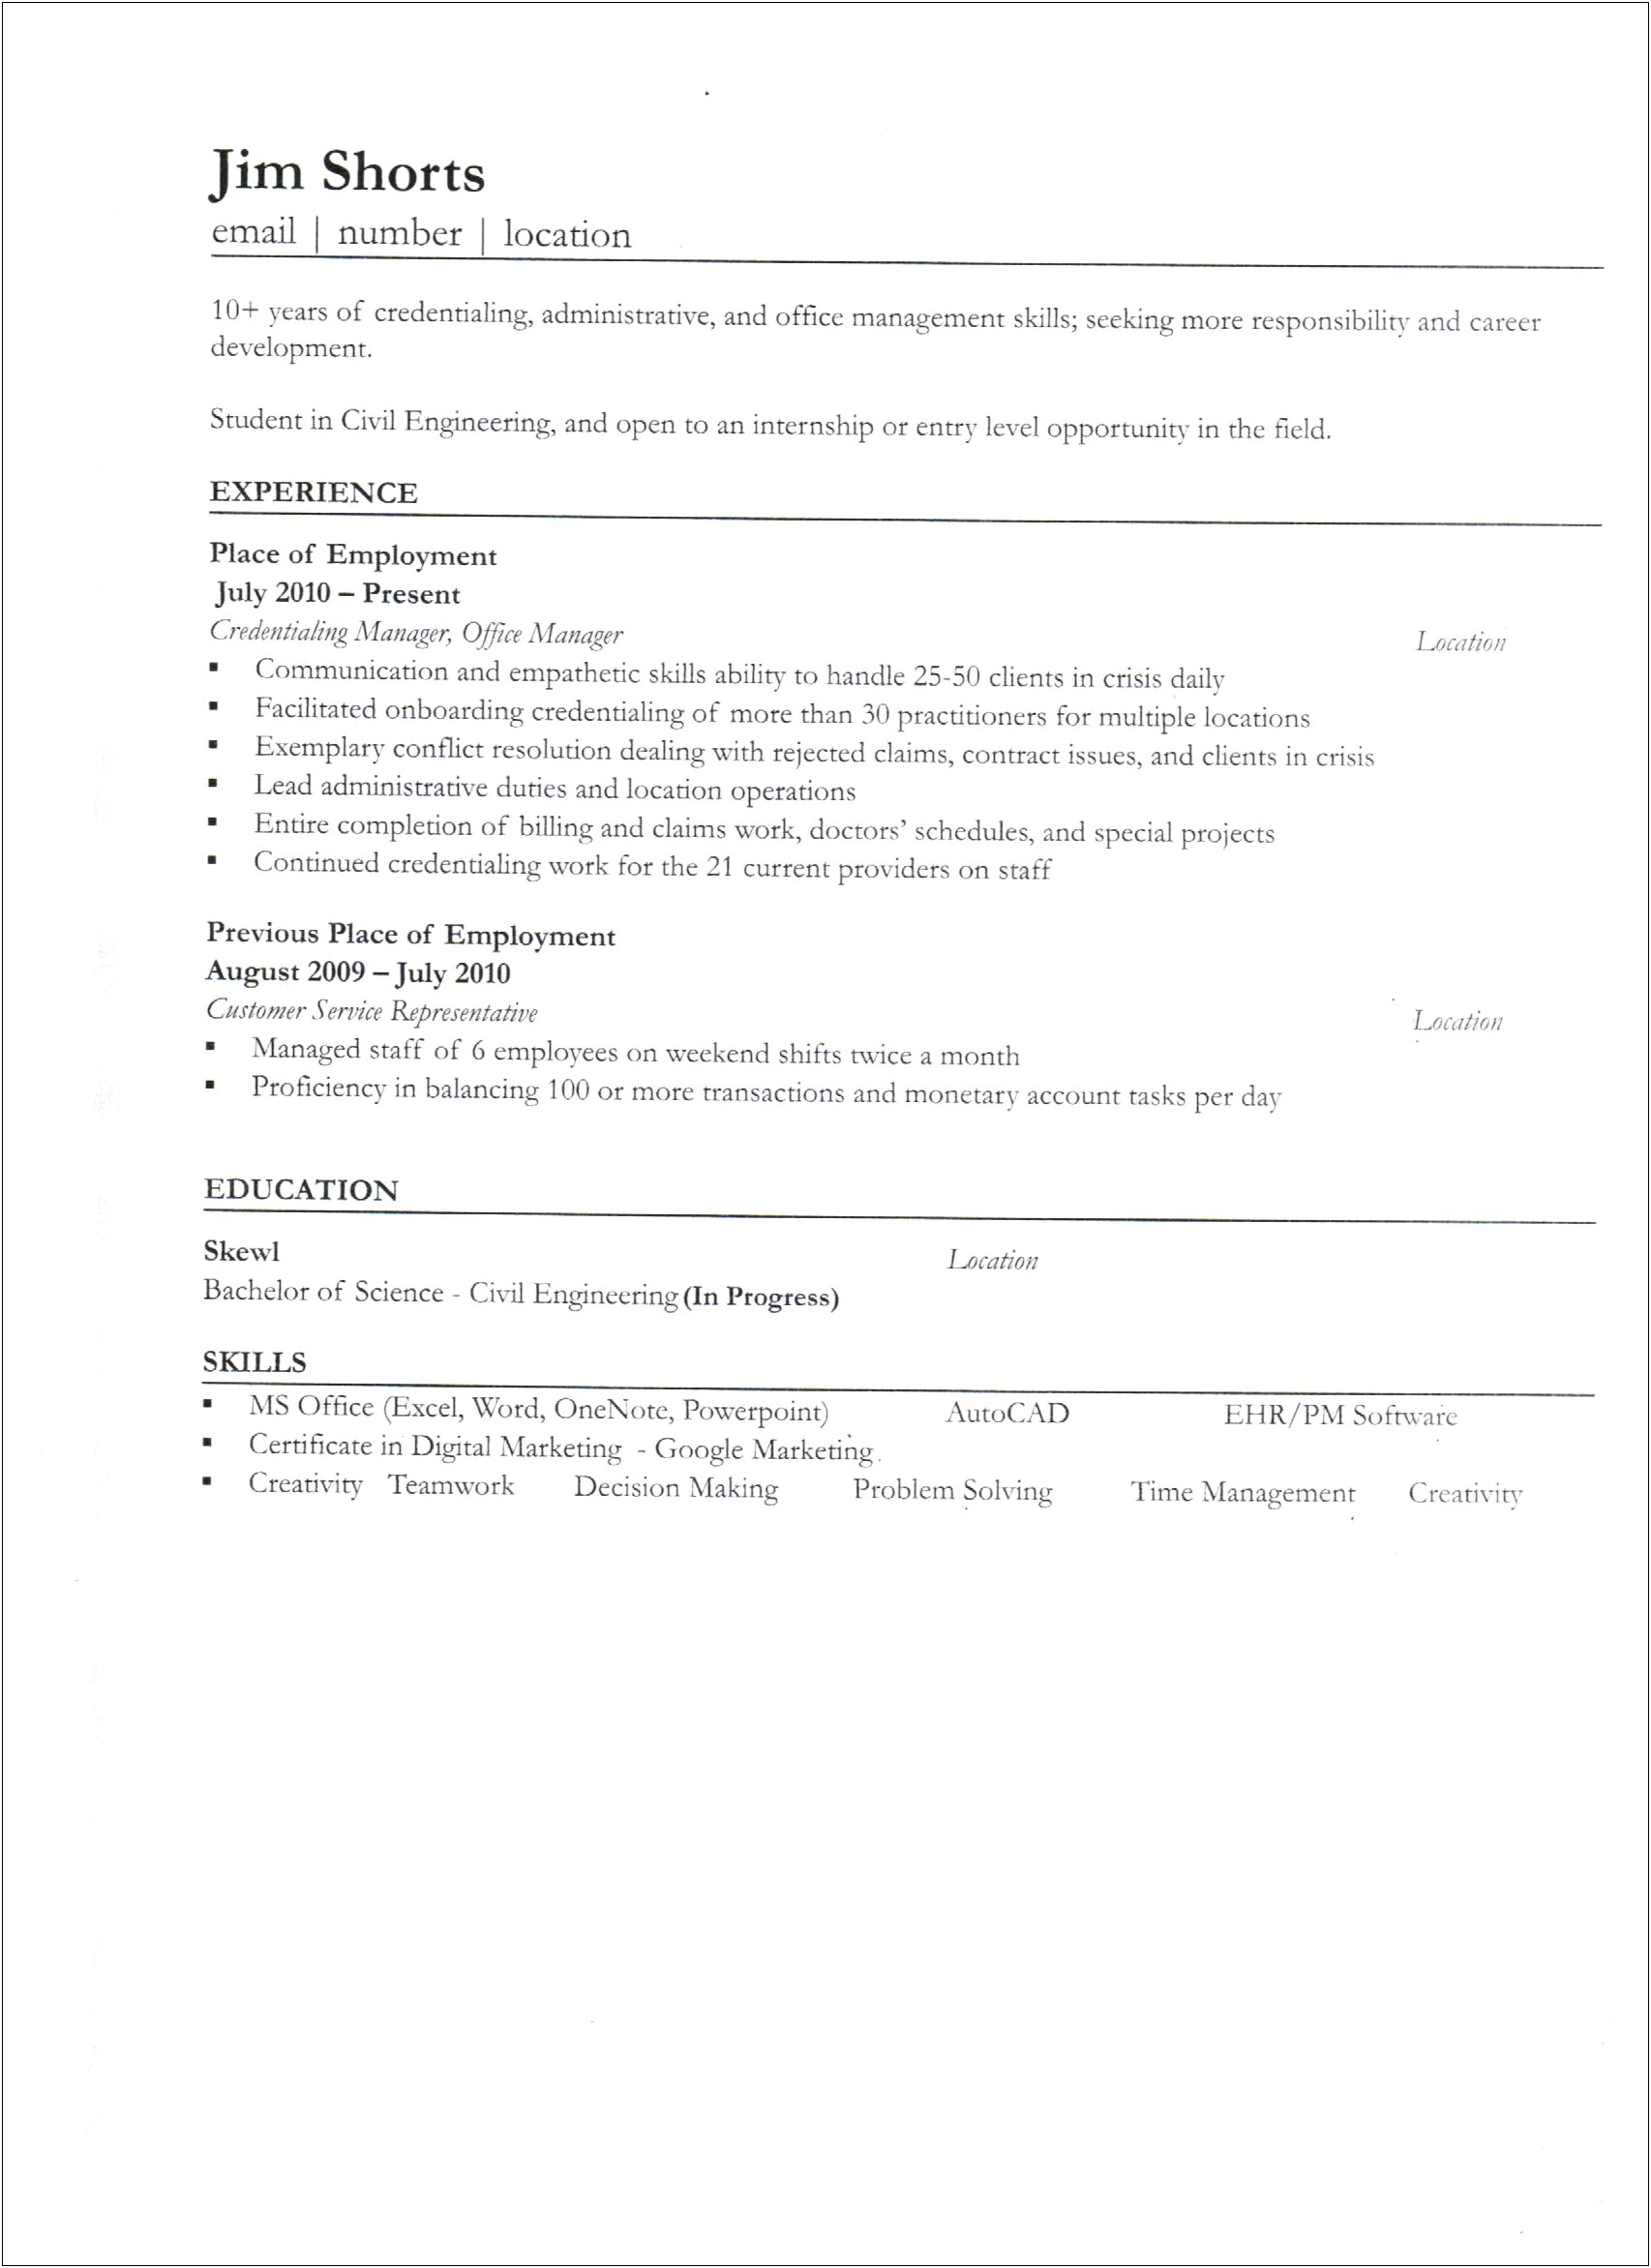 Where To Put Other Stuff In Resume